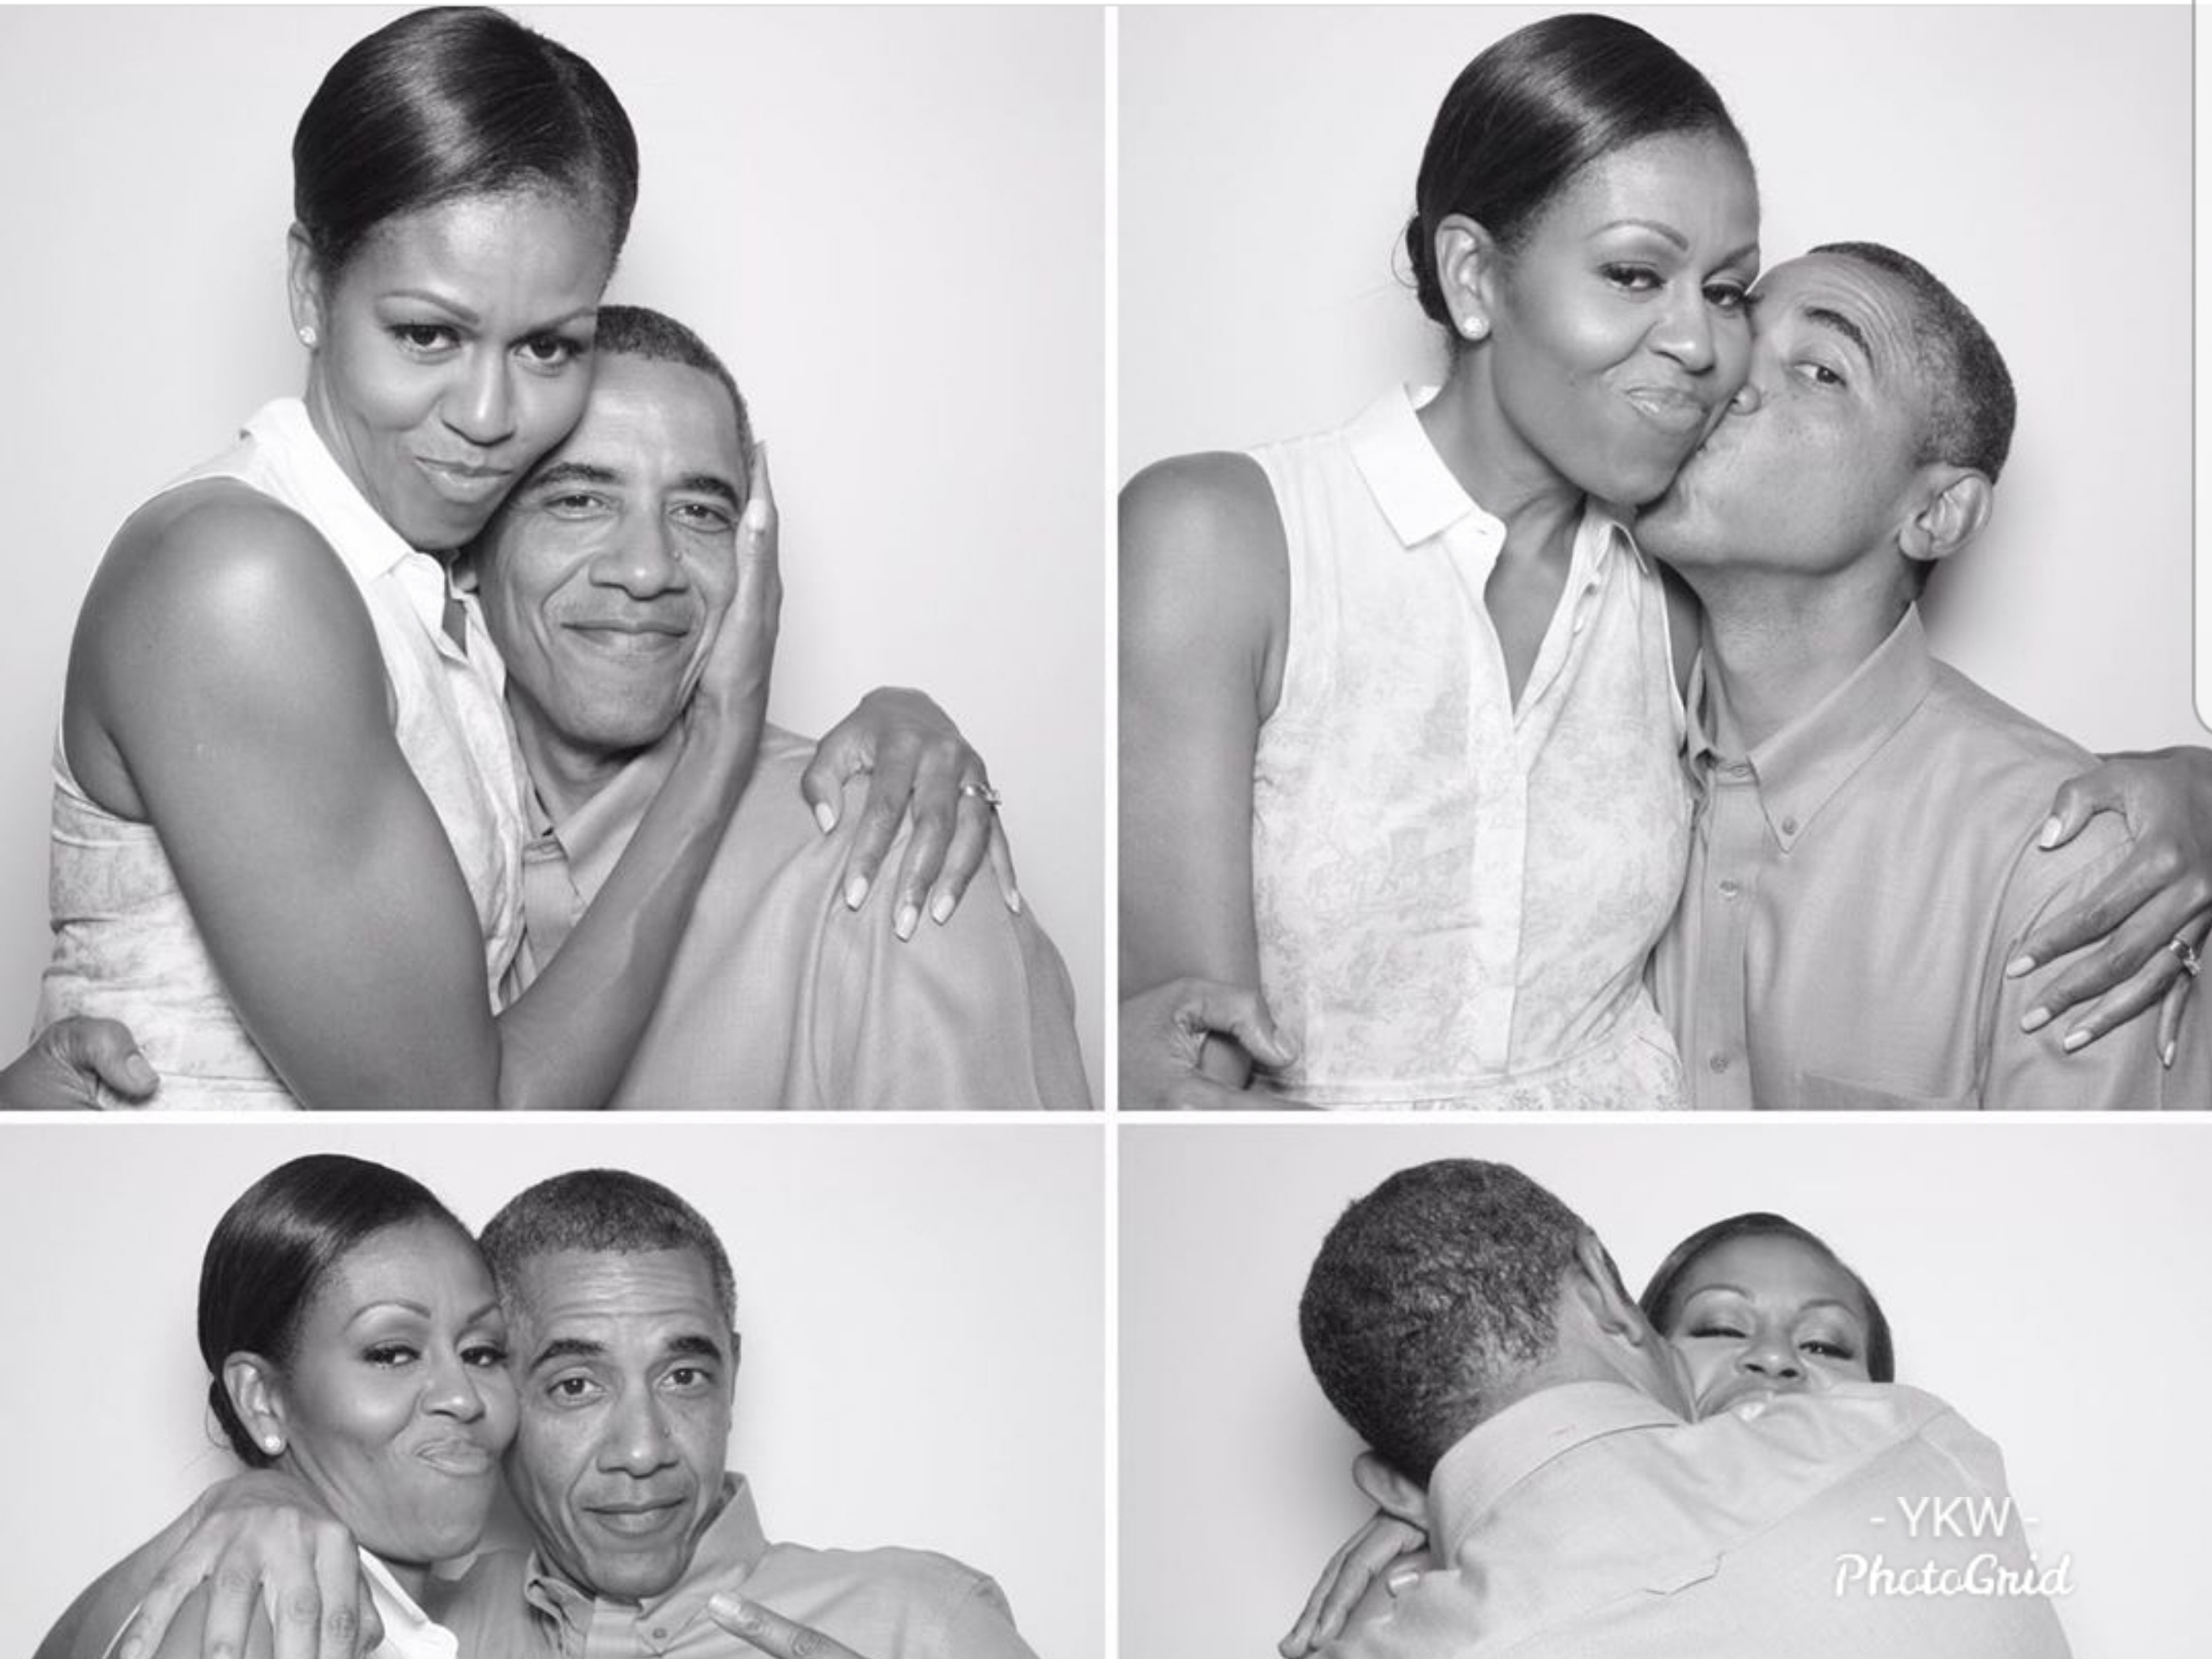 Barack Obama Shares Playful Photos With Sweet Birthday Message To Wife Michelle